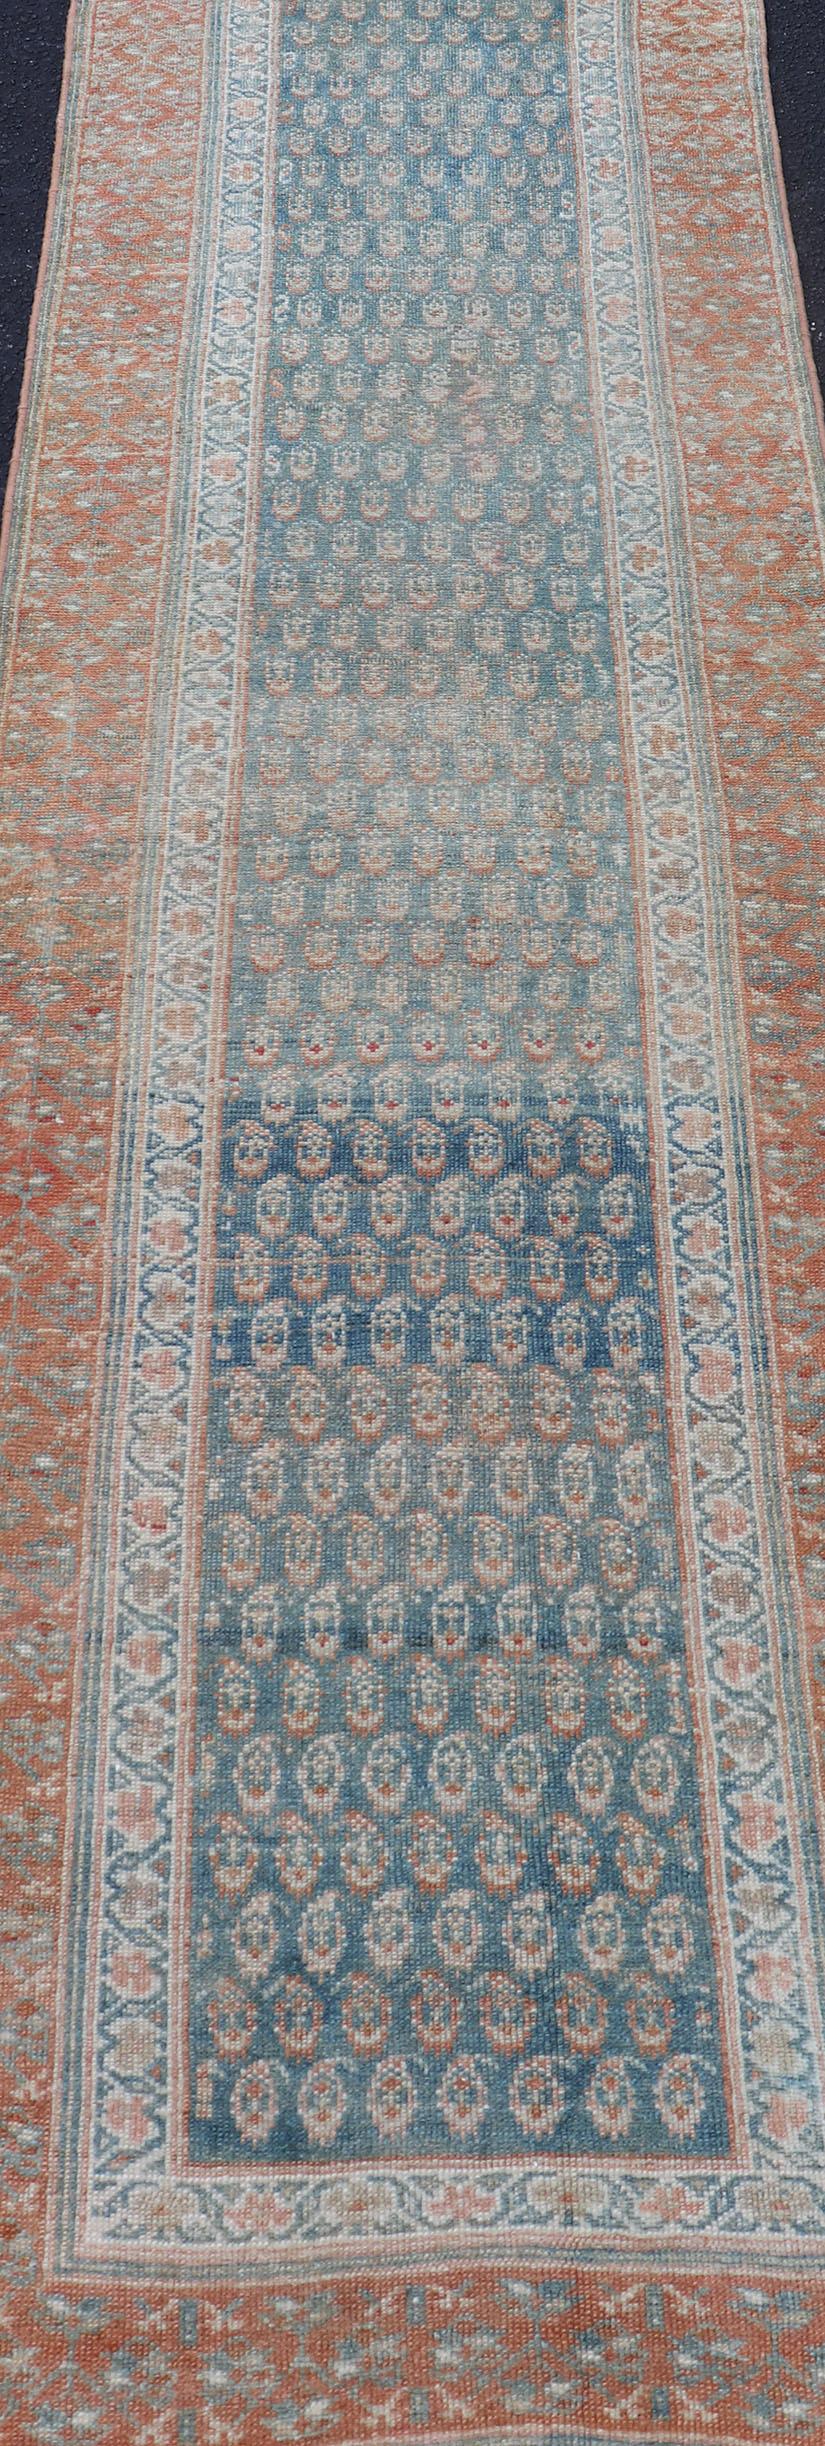 Paisley Field Antique Persian Kurdish Runner in Soft Teal Colors & Orange For Sale 5